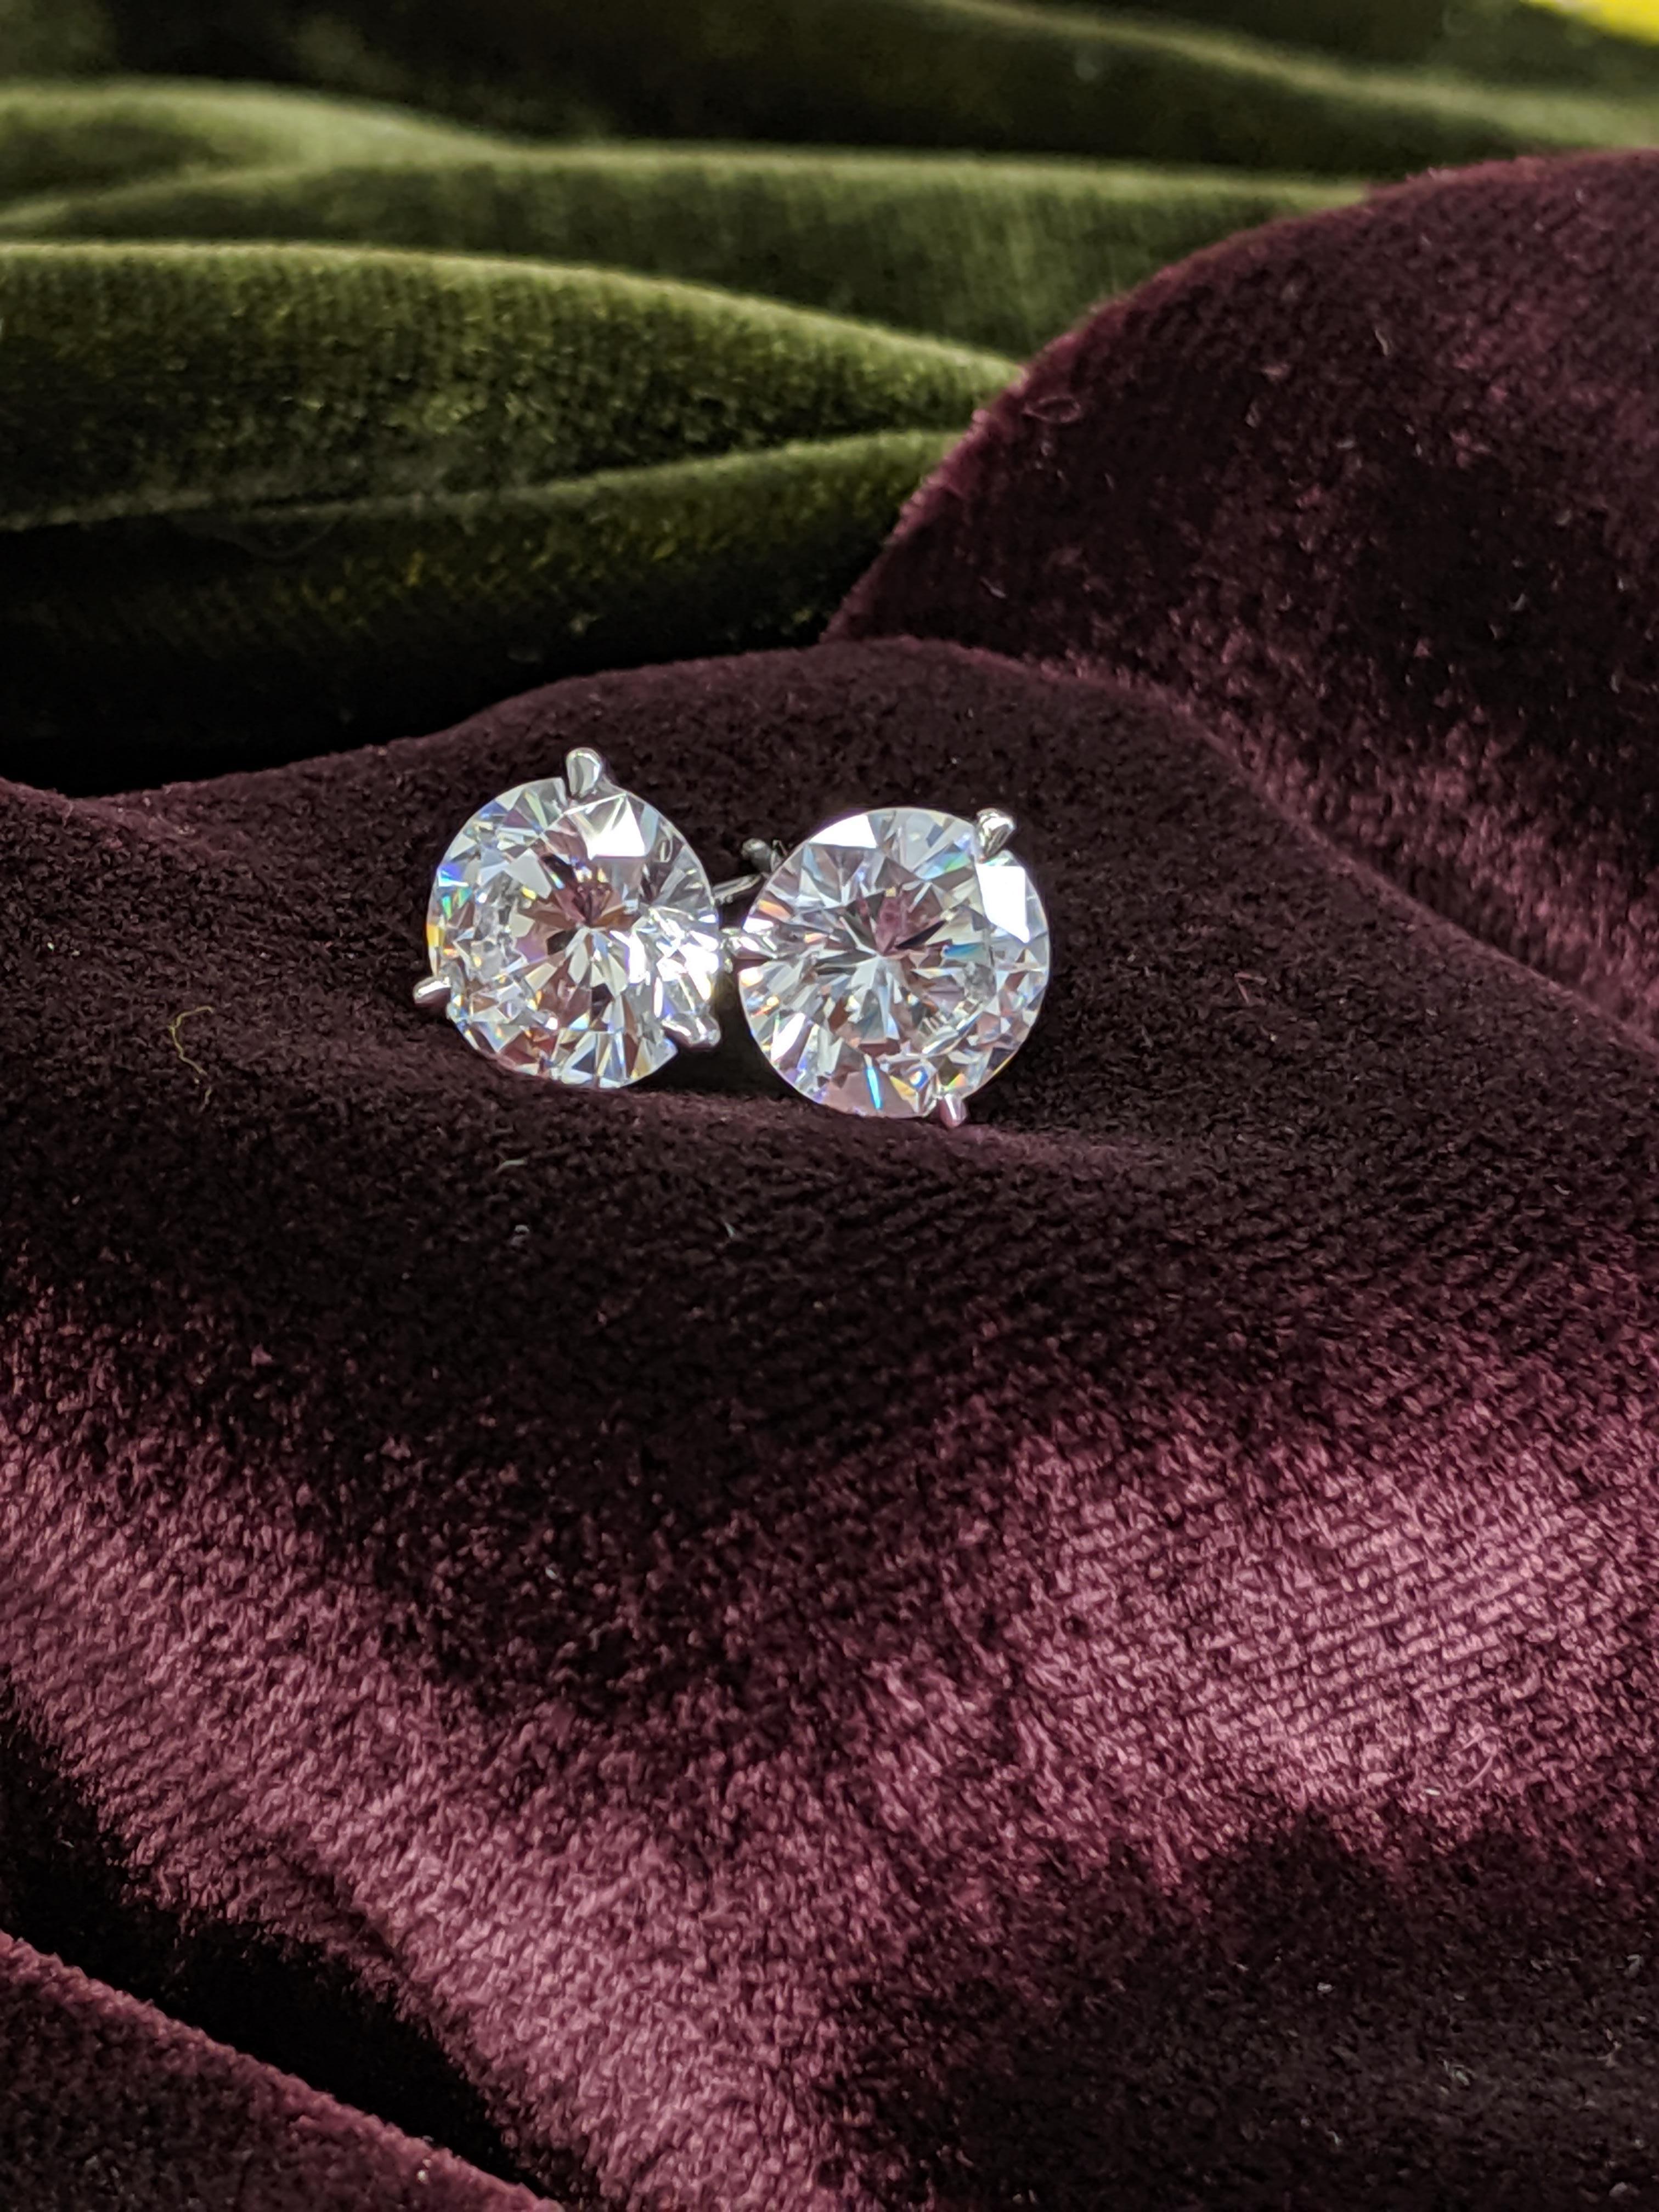 Custom mounted for you, these CLASSIC, clean, large and brilliant 4 carat total (2 carat each) Diamond Ear Studs are a staple in your luxury portfolio.  Our best offering of Round Brilliant Cut Diamonds come with GIA grading reports with the 